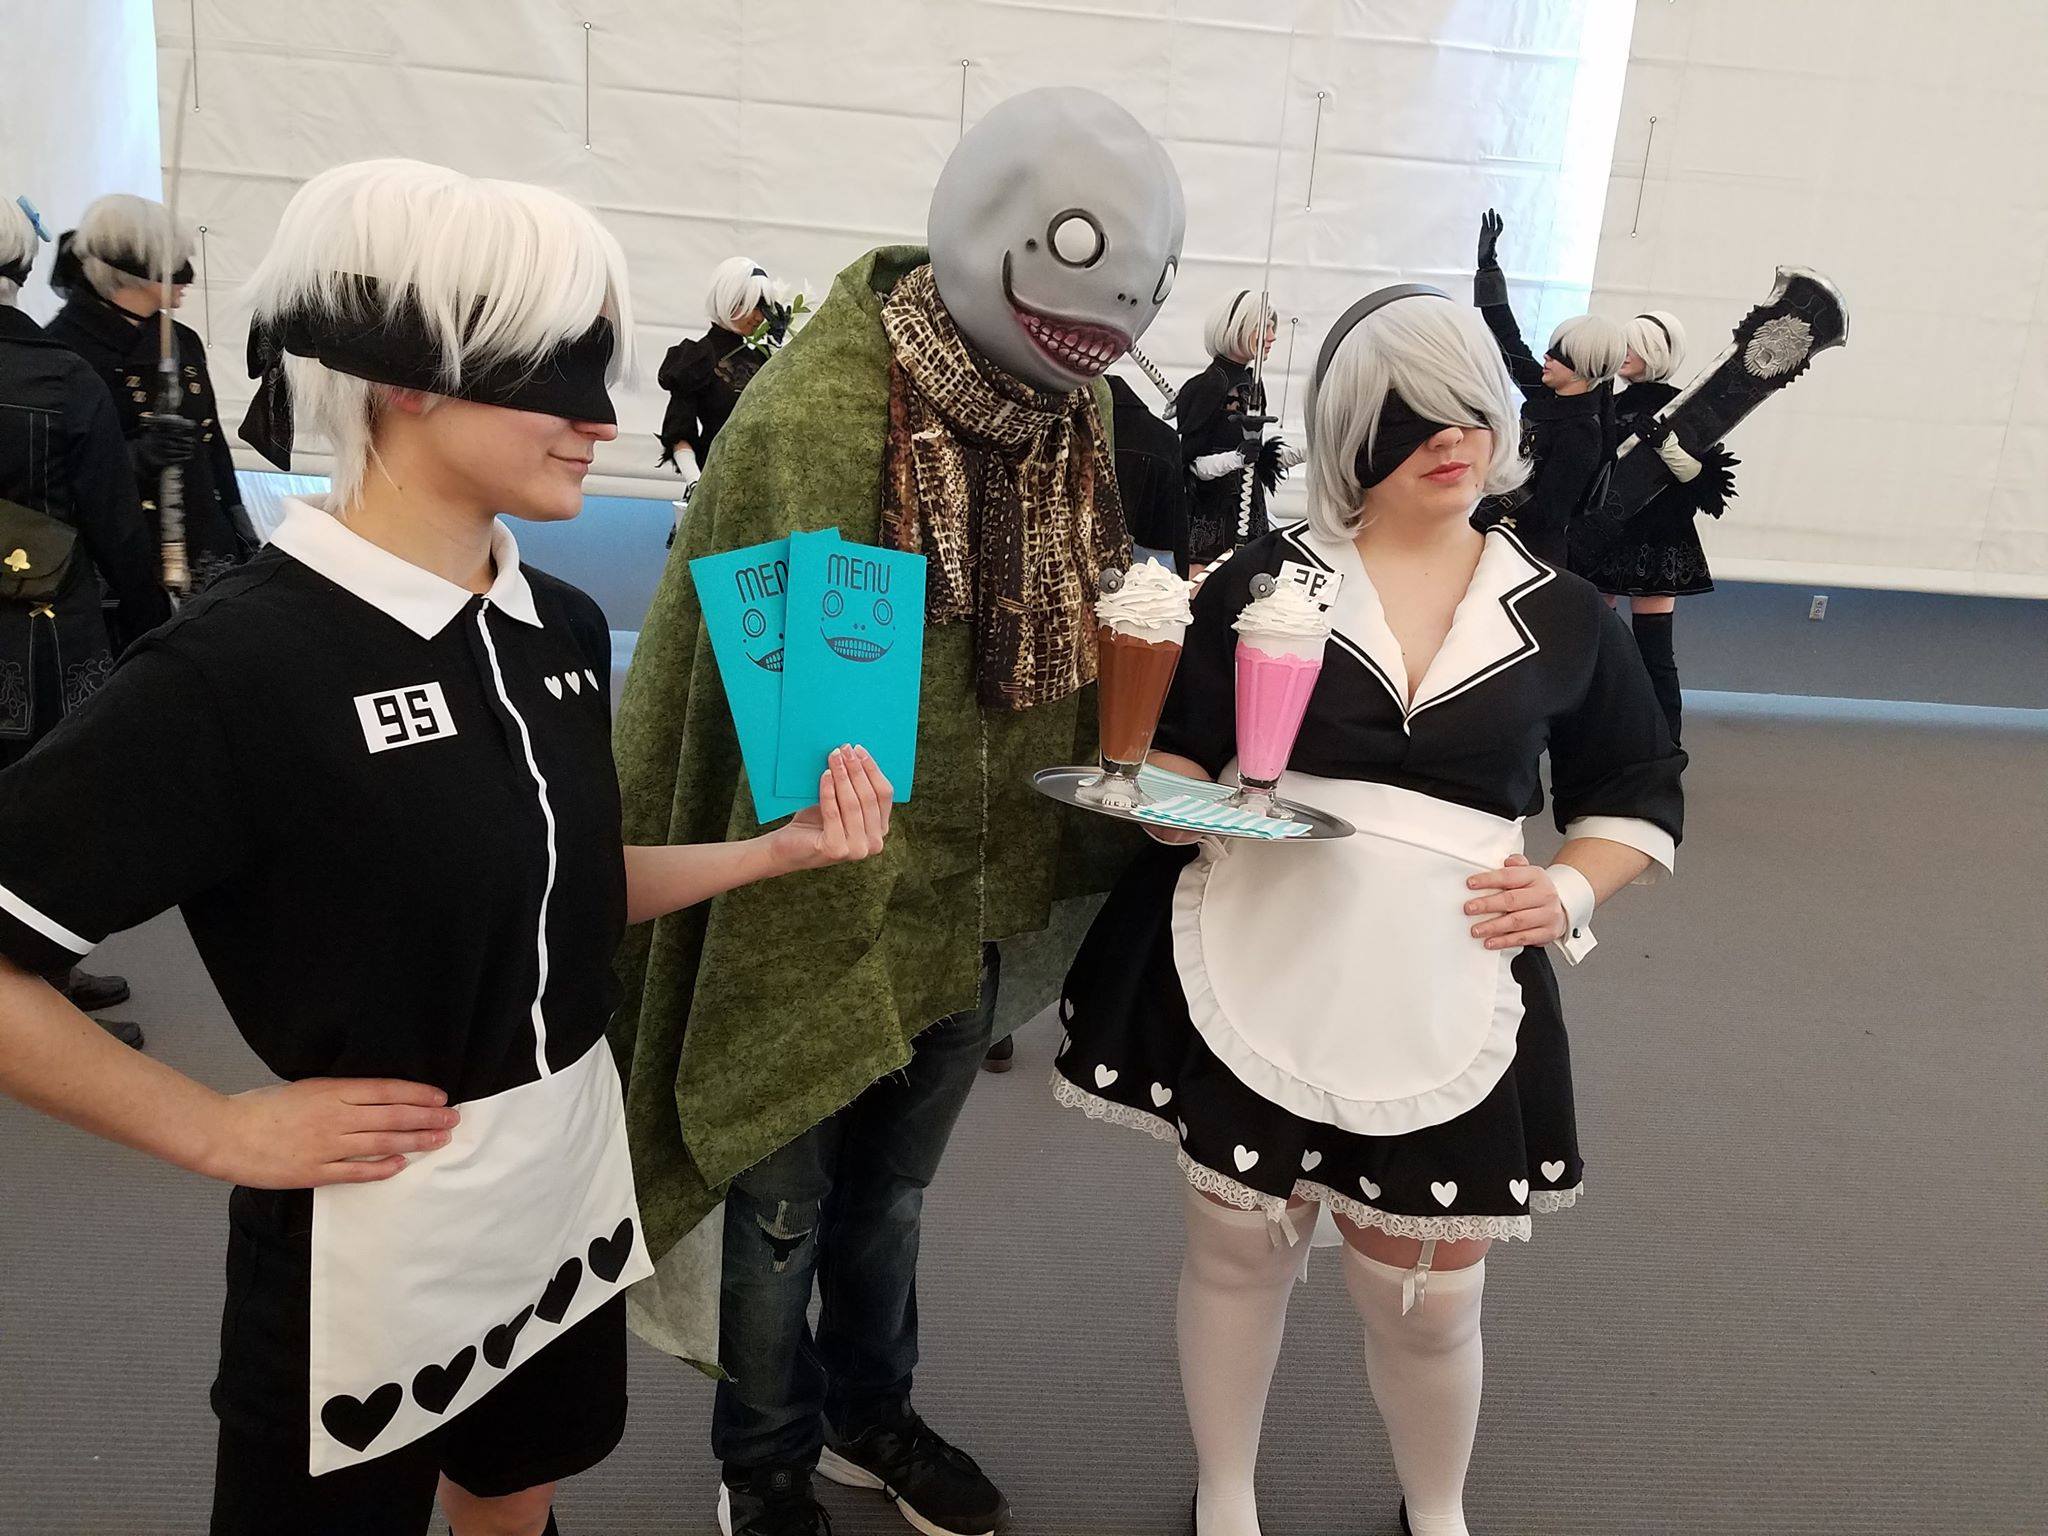 Three cosplayers from the video game Nier Automata pose for a picture at an anime convention.